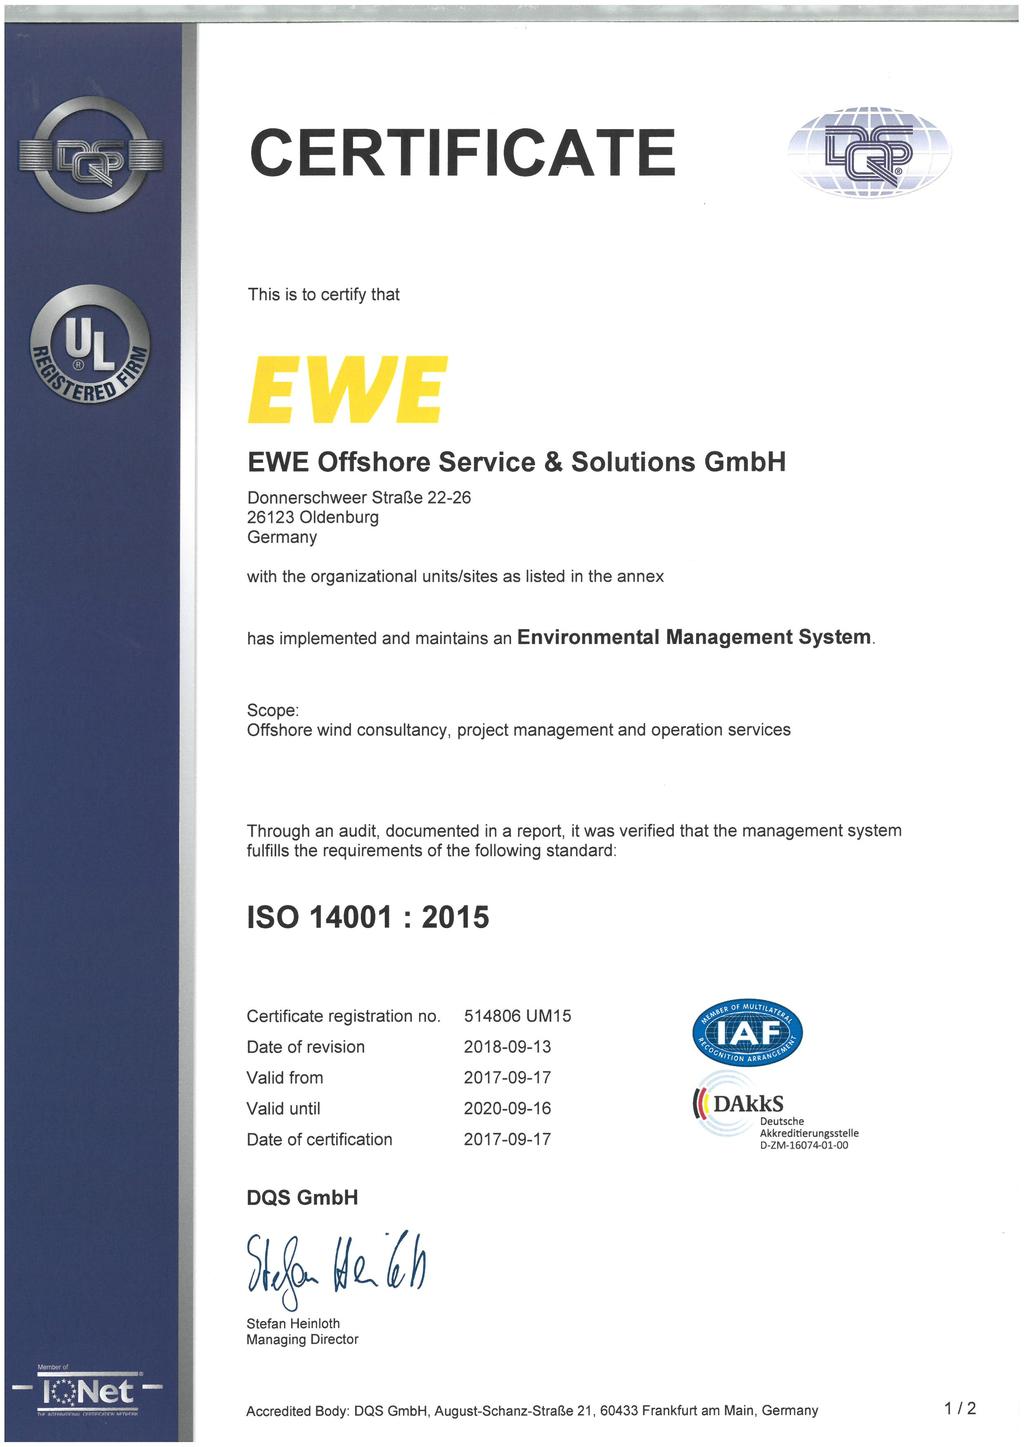 CERTIFICATE This is to certify that EMIL Don nerschweer Straße 22-26 with the organizational units/sites as listed in the annex has implemented and maintains an EnVirOnMental Management System.